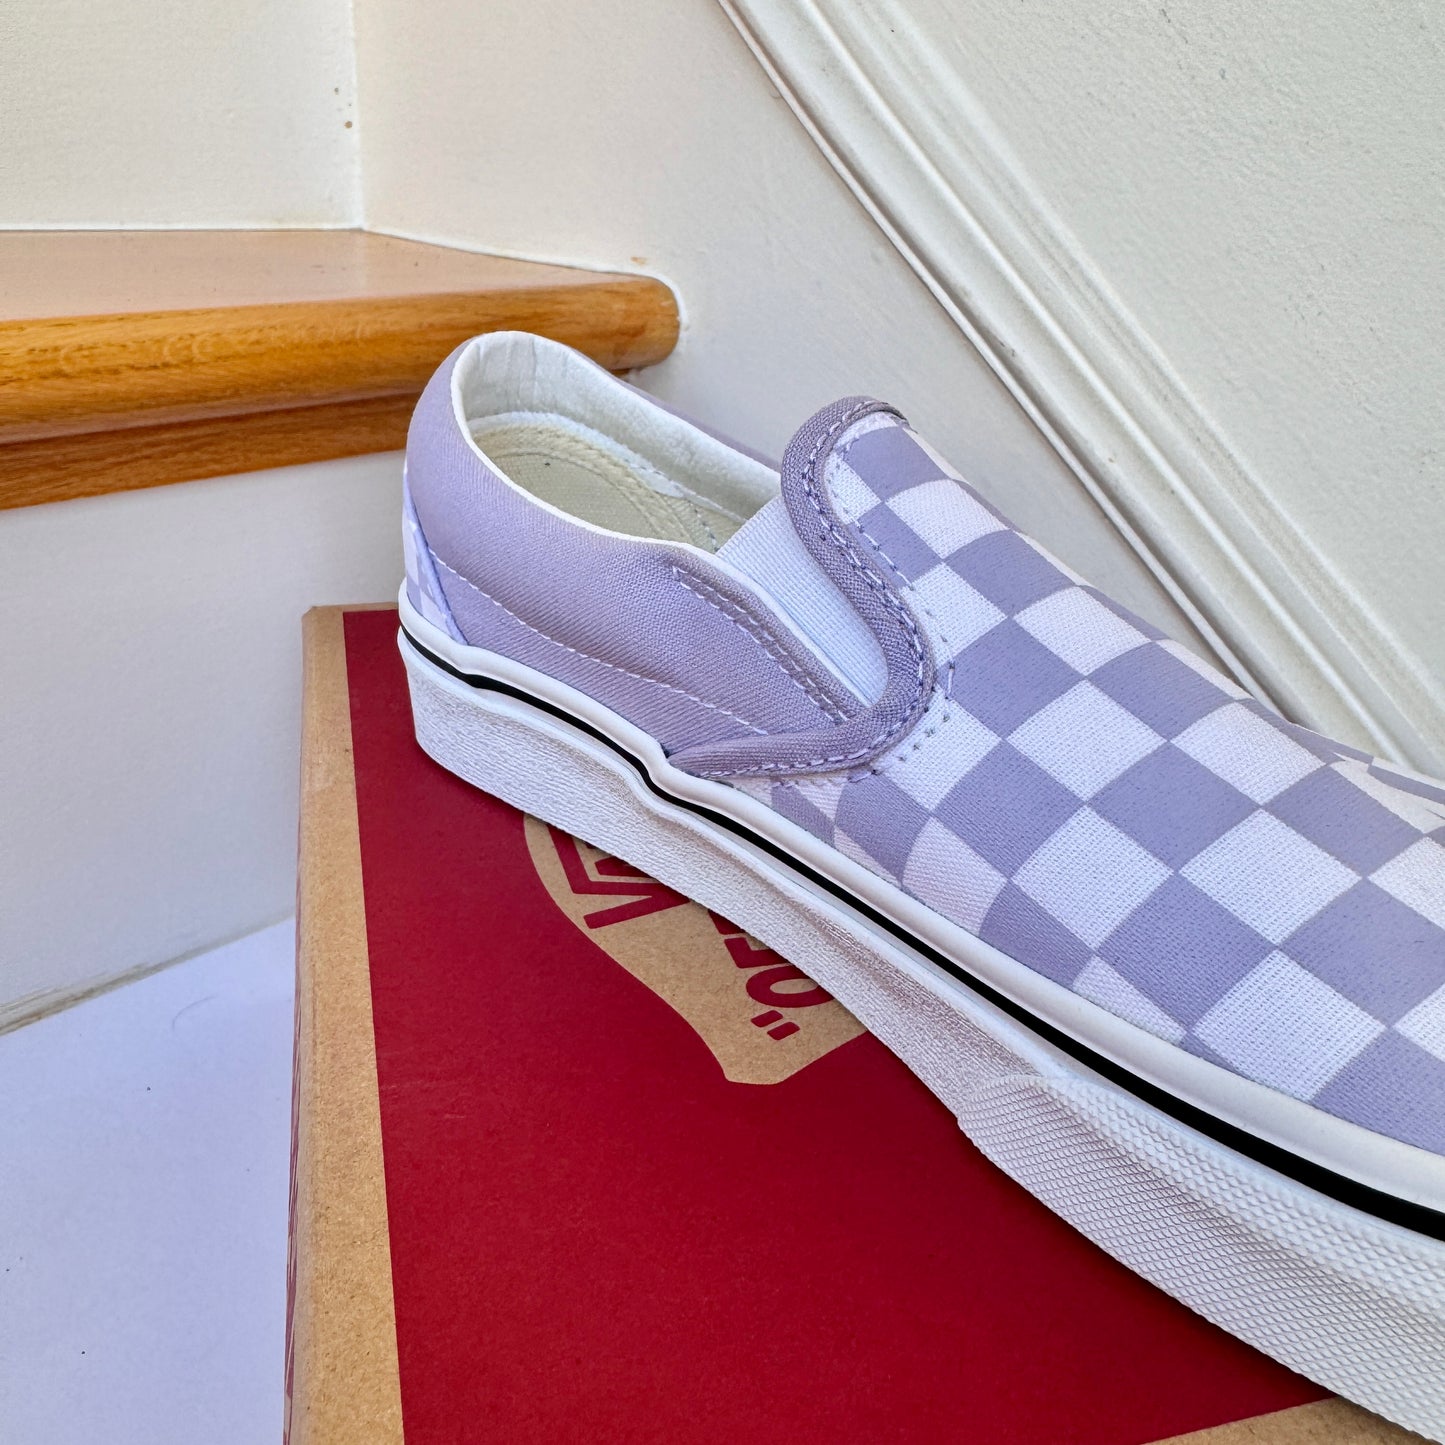 Vans Slip-On Classic Skate Shoes Checkerboard Heather Purple Shoes Unisex